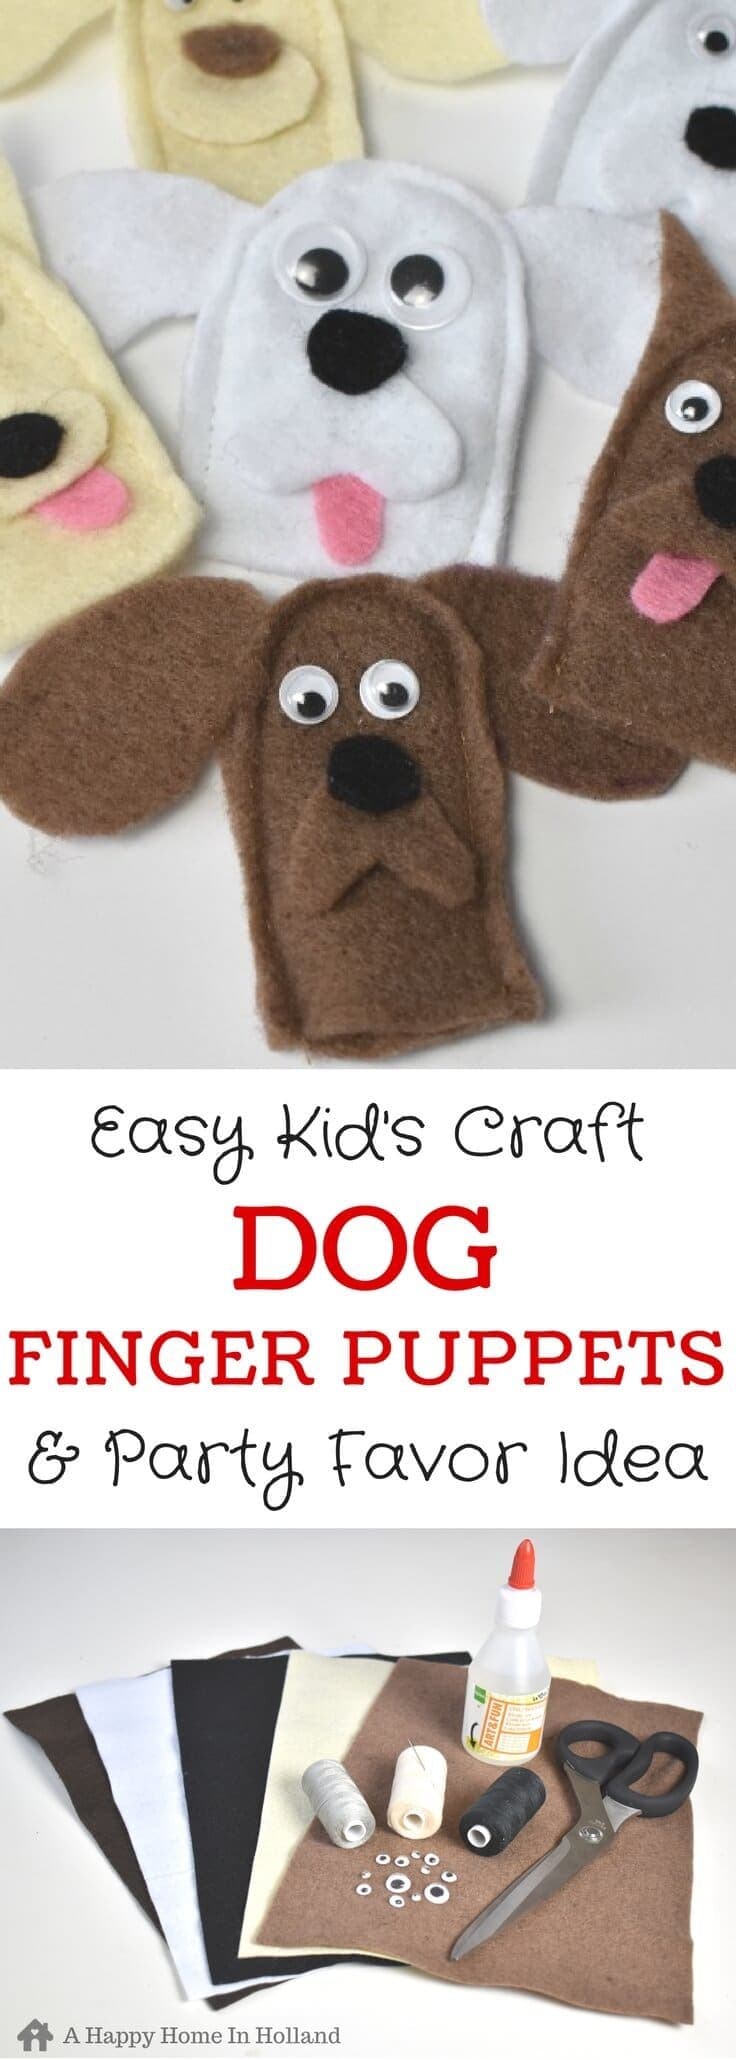 Easy tutorial showing how to make cute finger puppet puppies to make with the kids or to use as party favors - includes free printable!